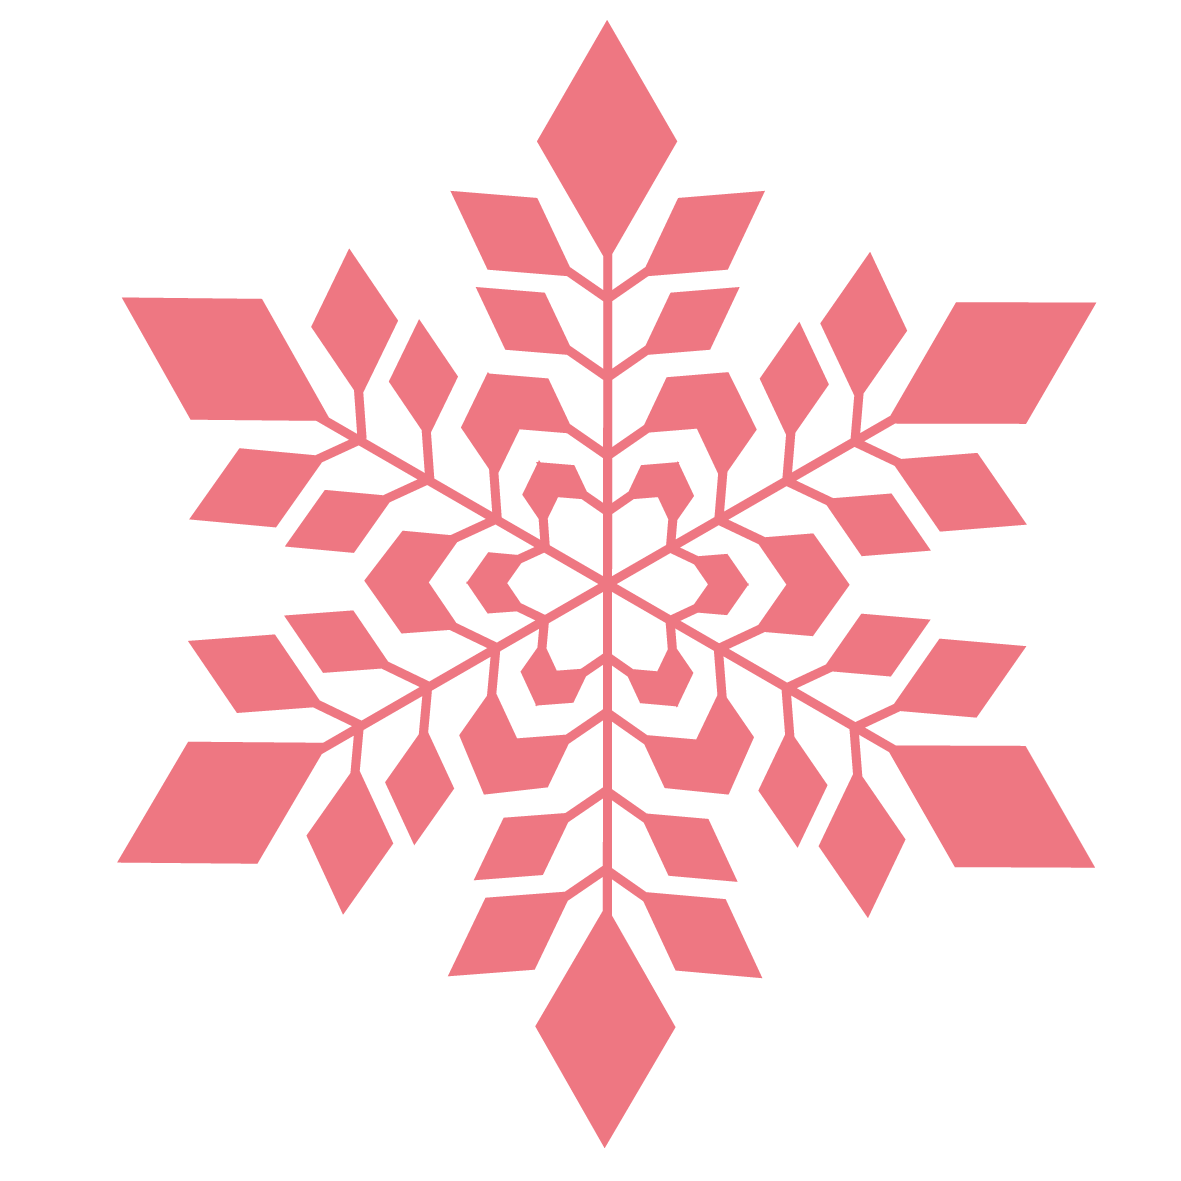 Transparent Snowflake Png Images  Pictures - Becuo